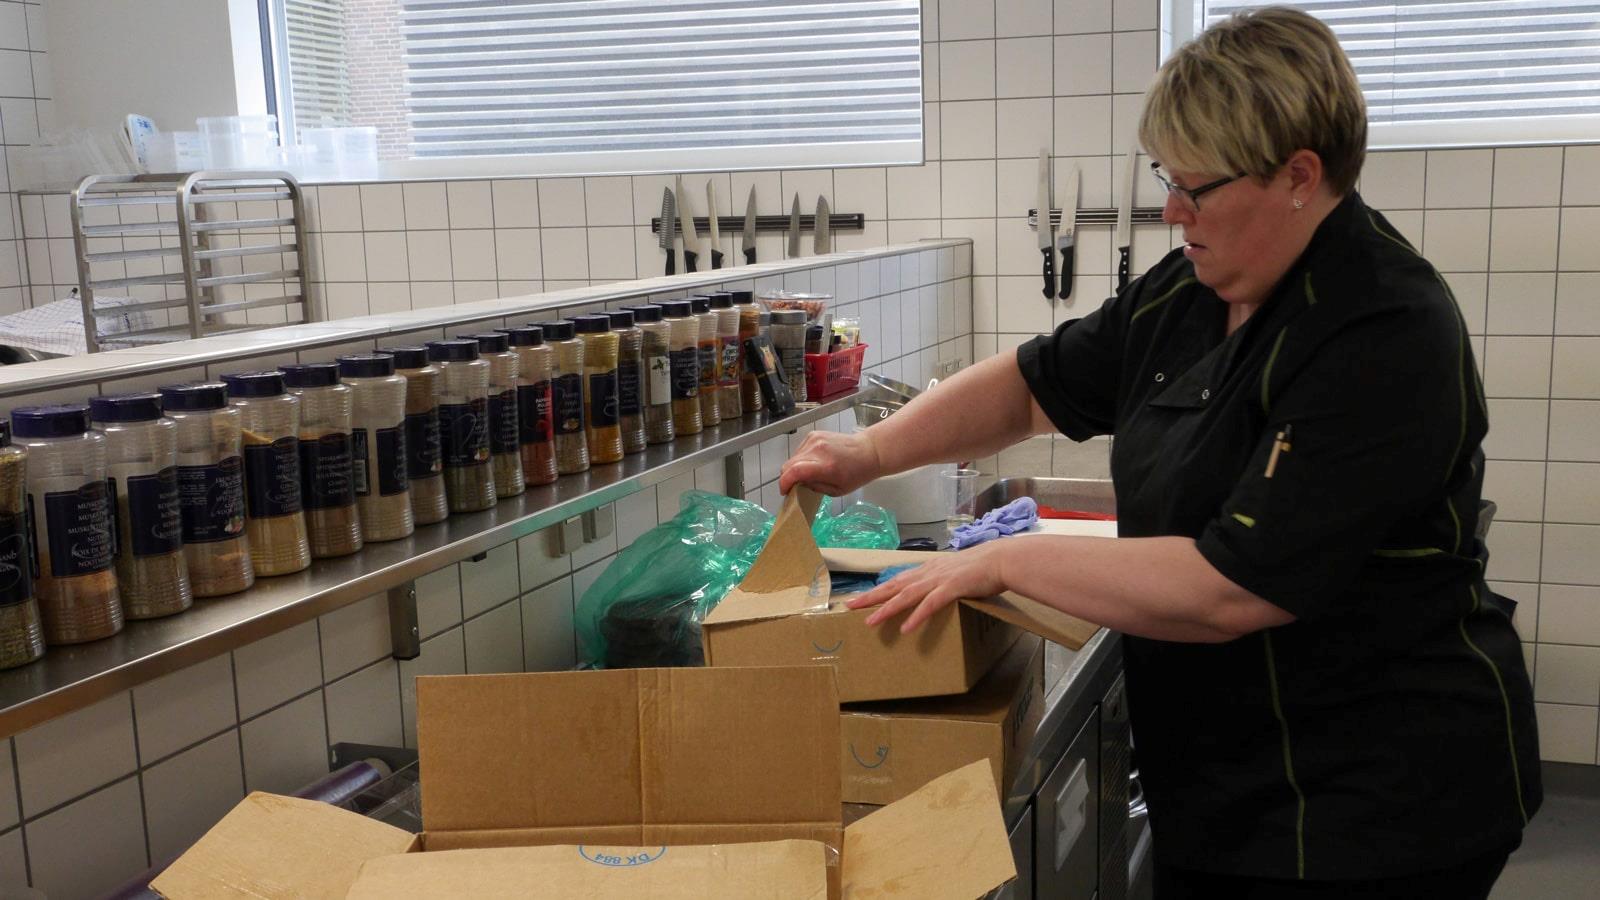 Canteen employee opening cardboard boxes with Tulip meat products